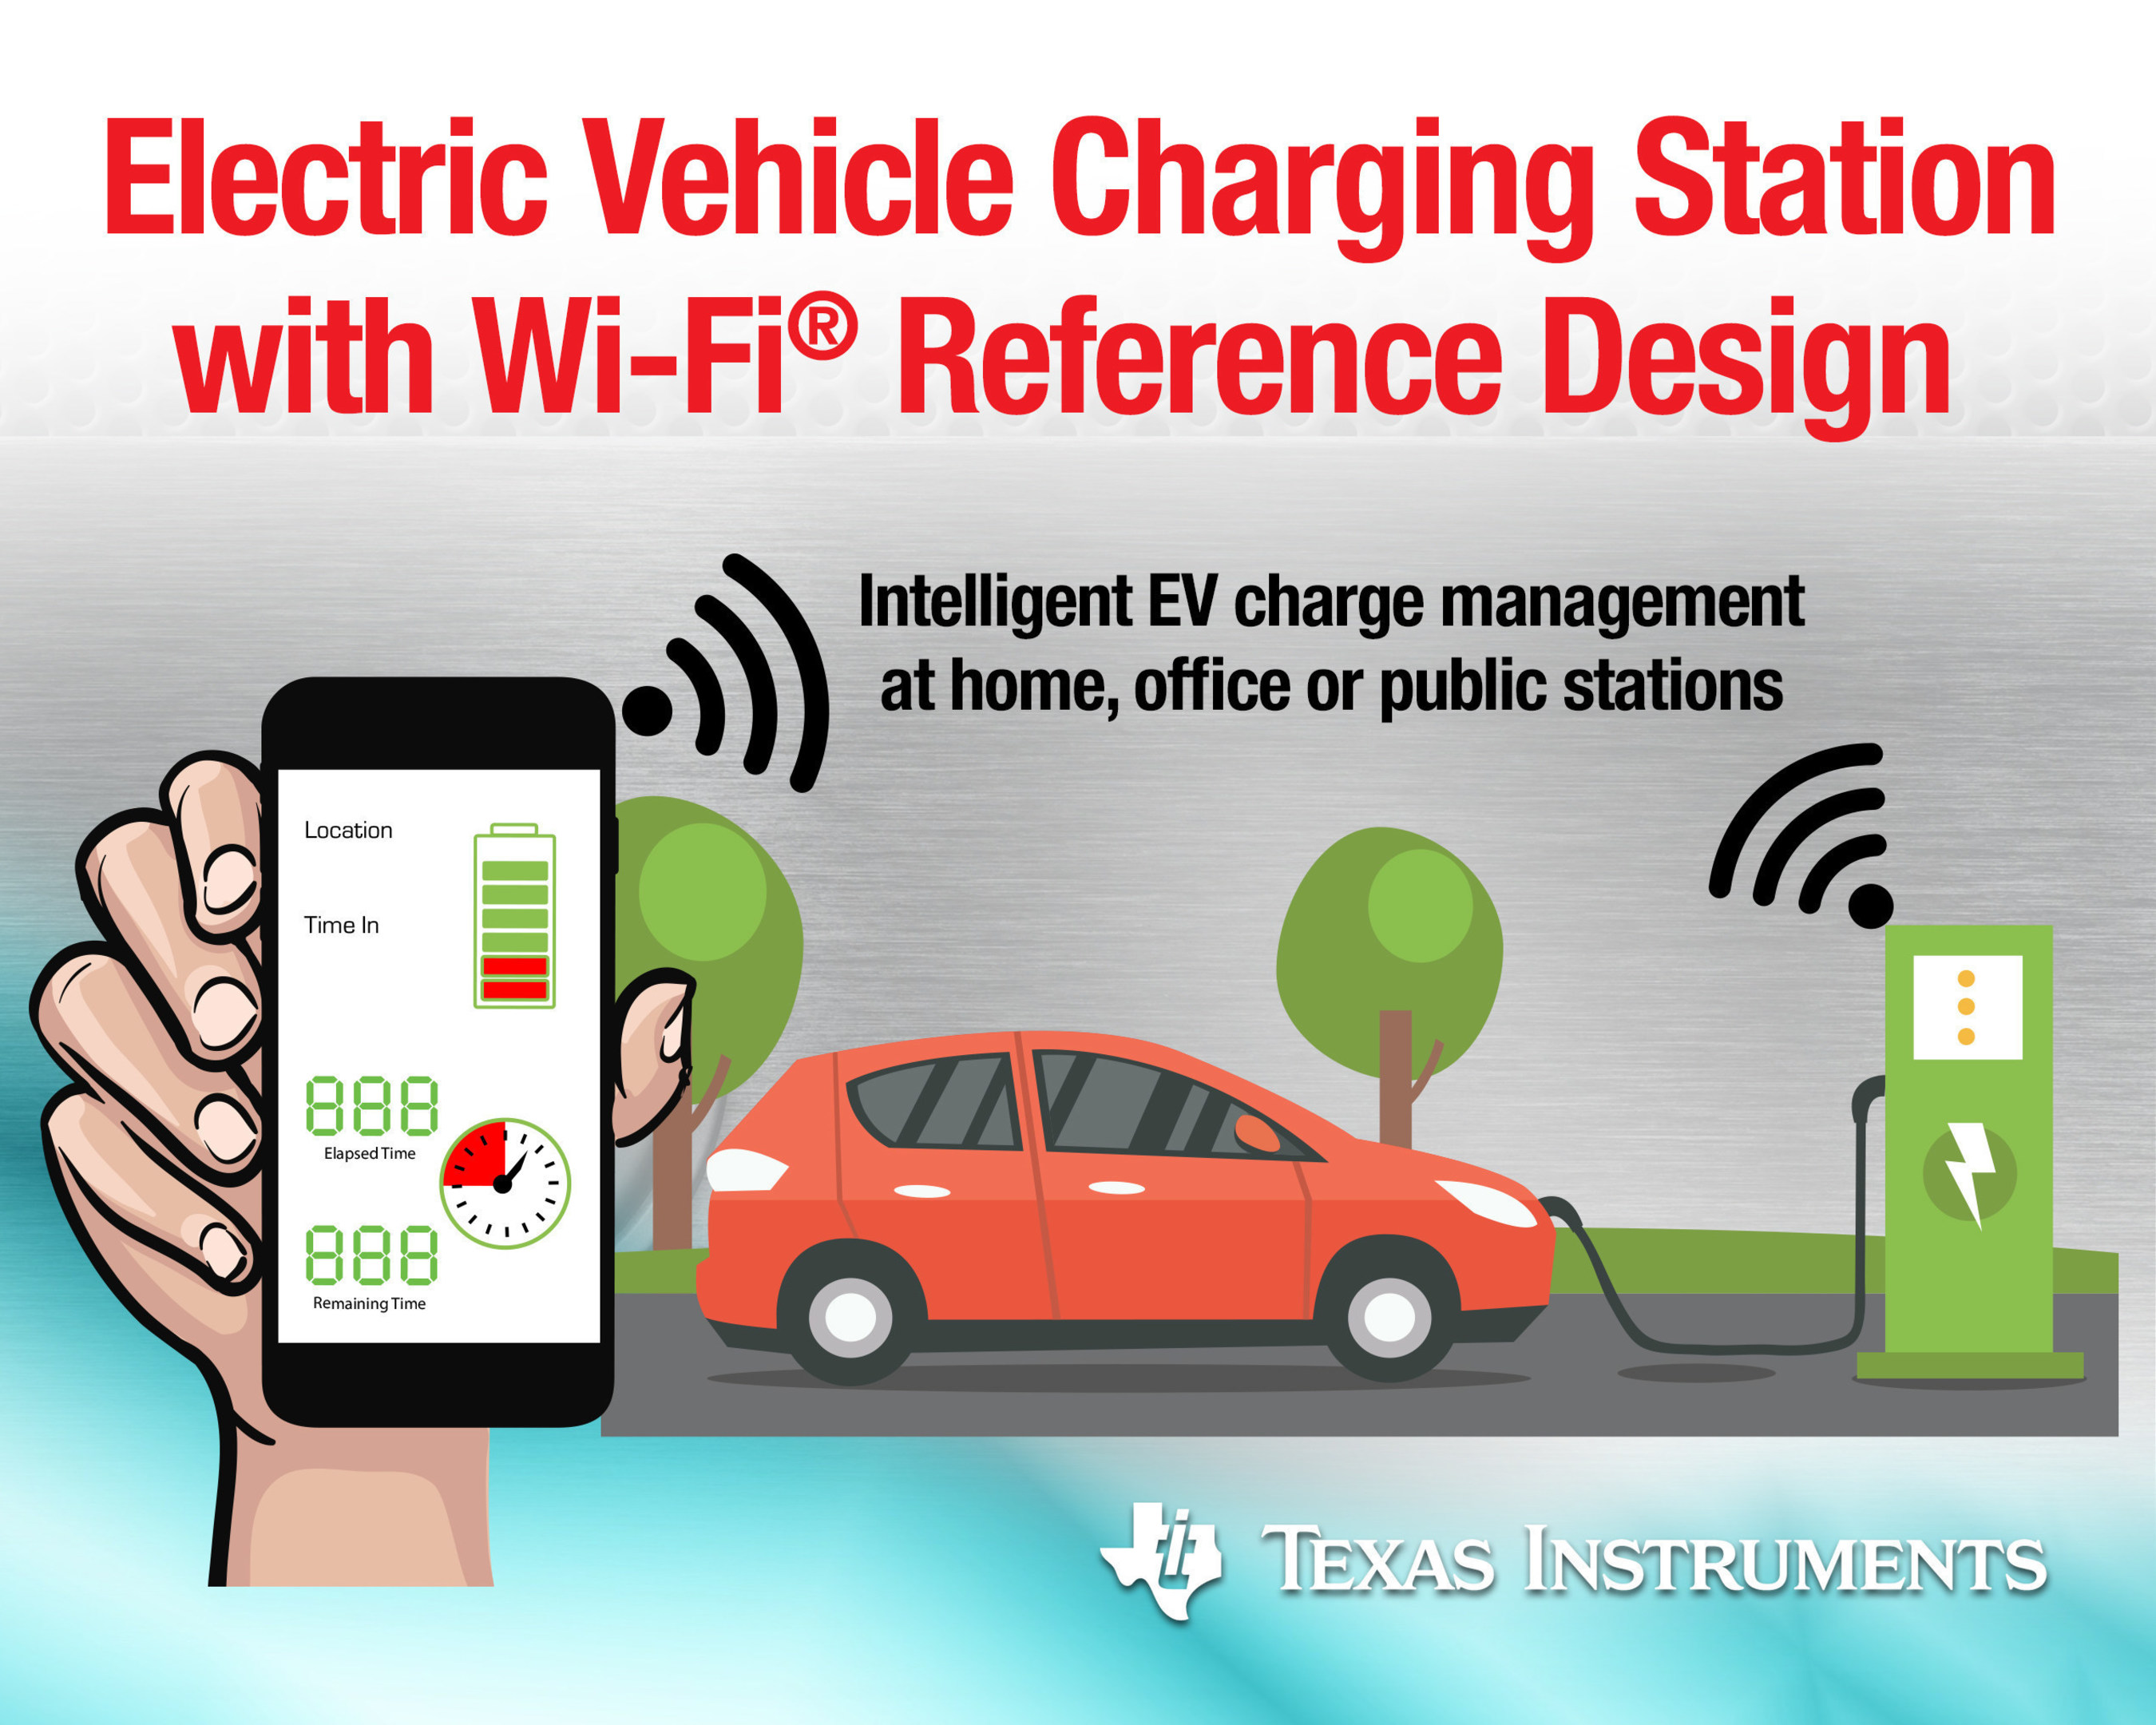 Texas Instruments adds Wi-Fi capability to EV charging stations with new reference design.